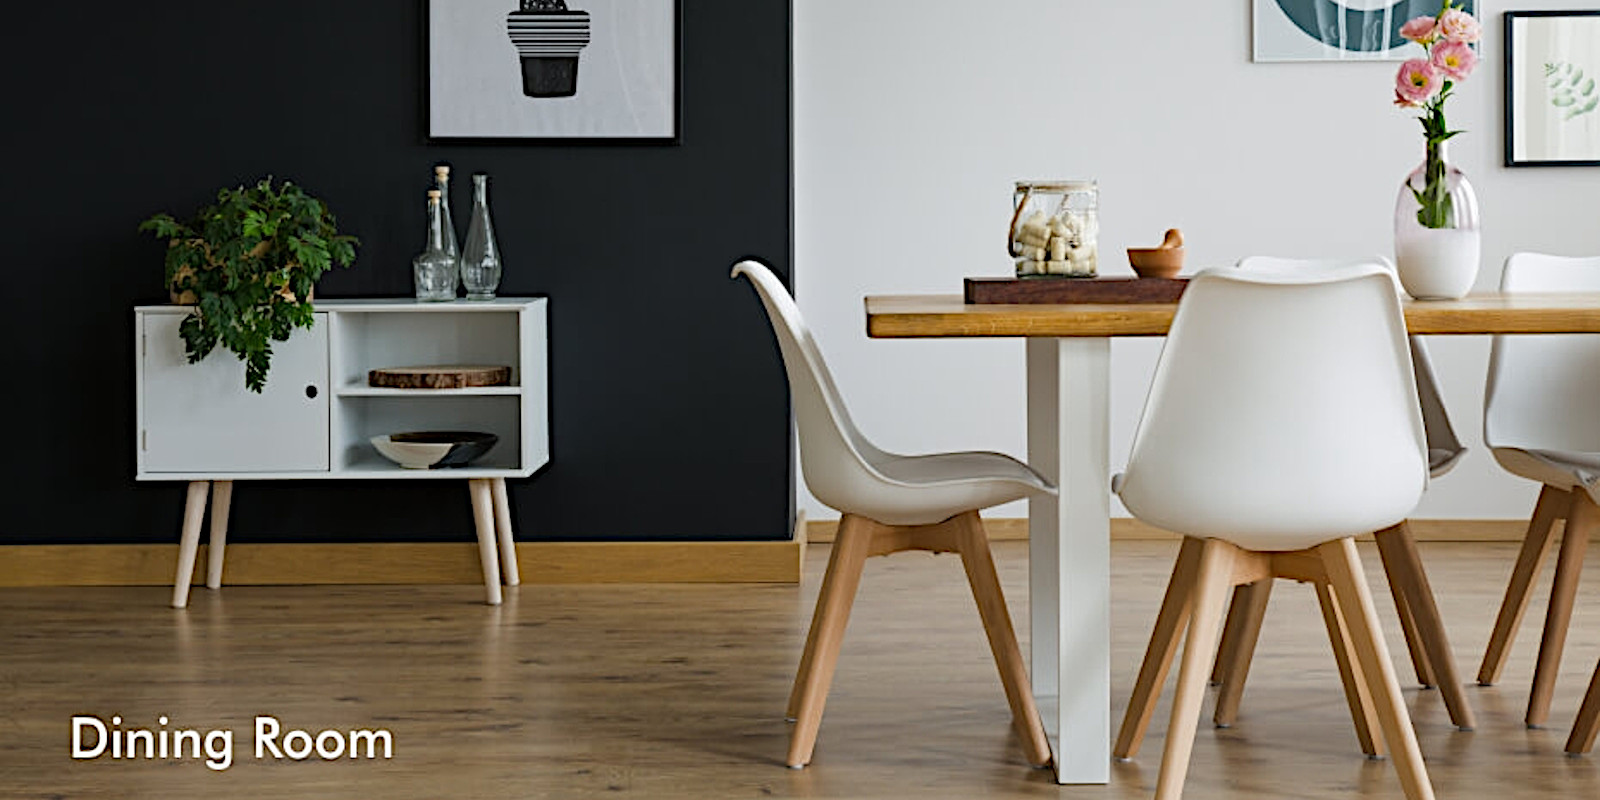 Dining room furniture at a bargain price